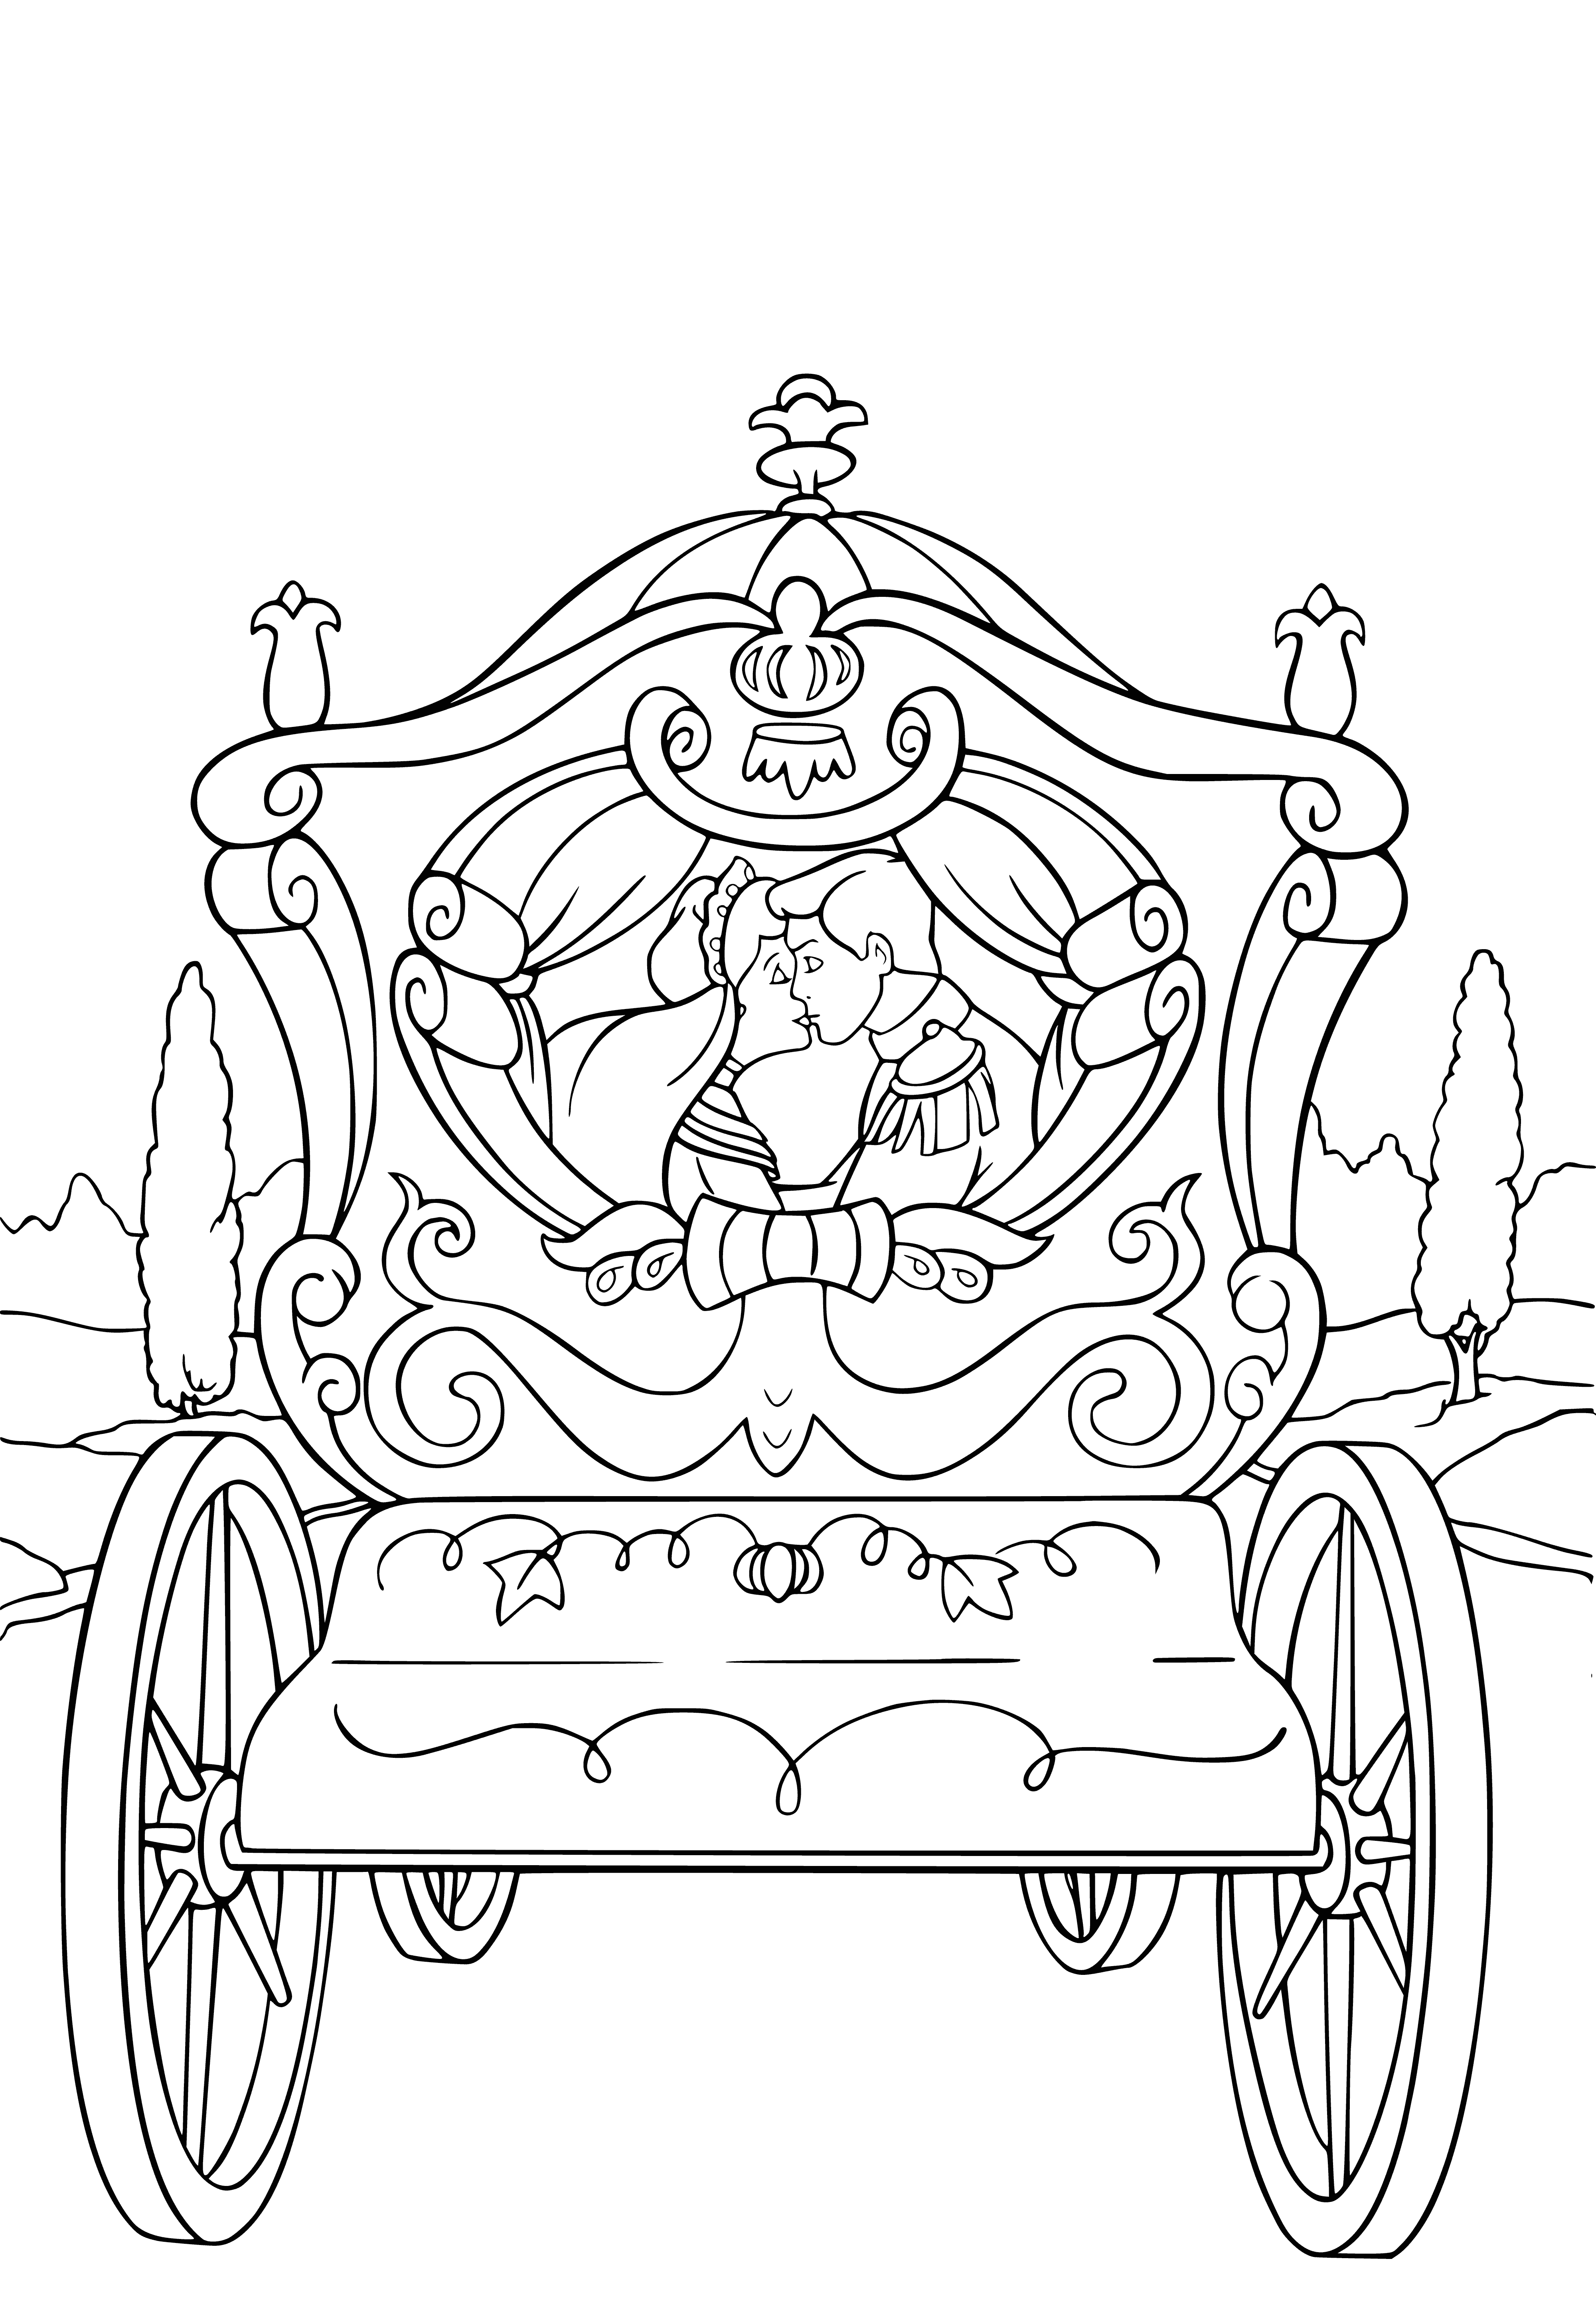 Cinderella and the prince in the carriage coloring page